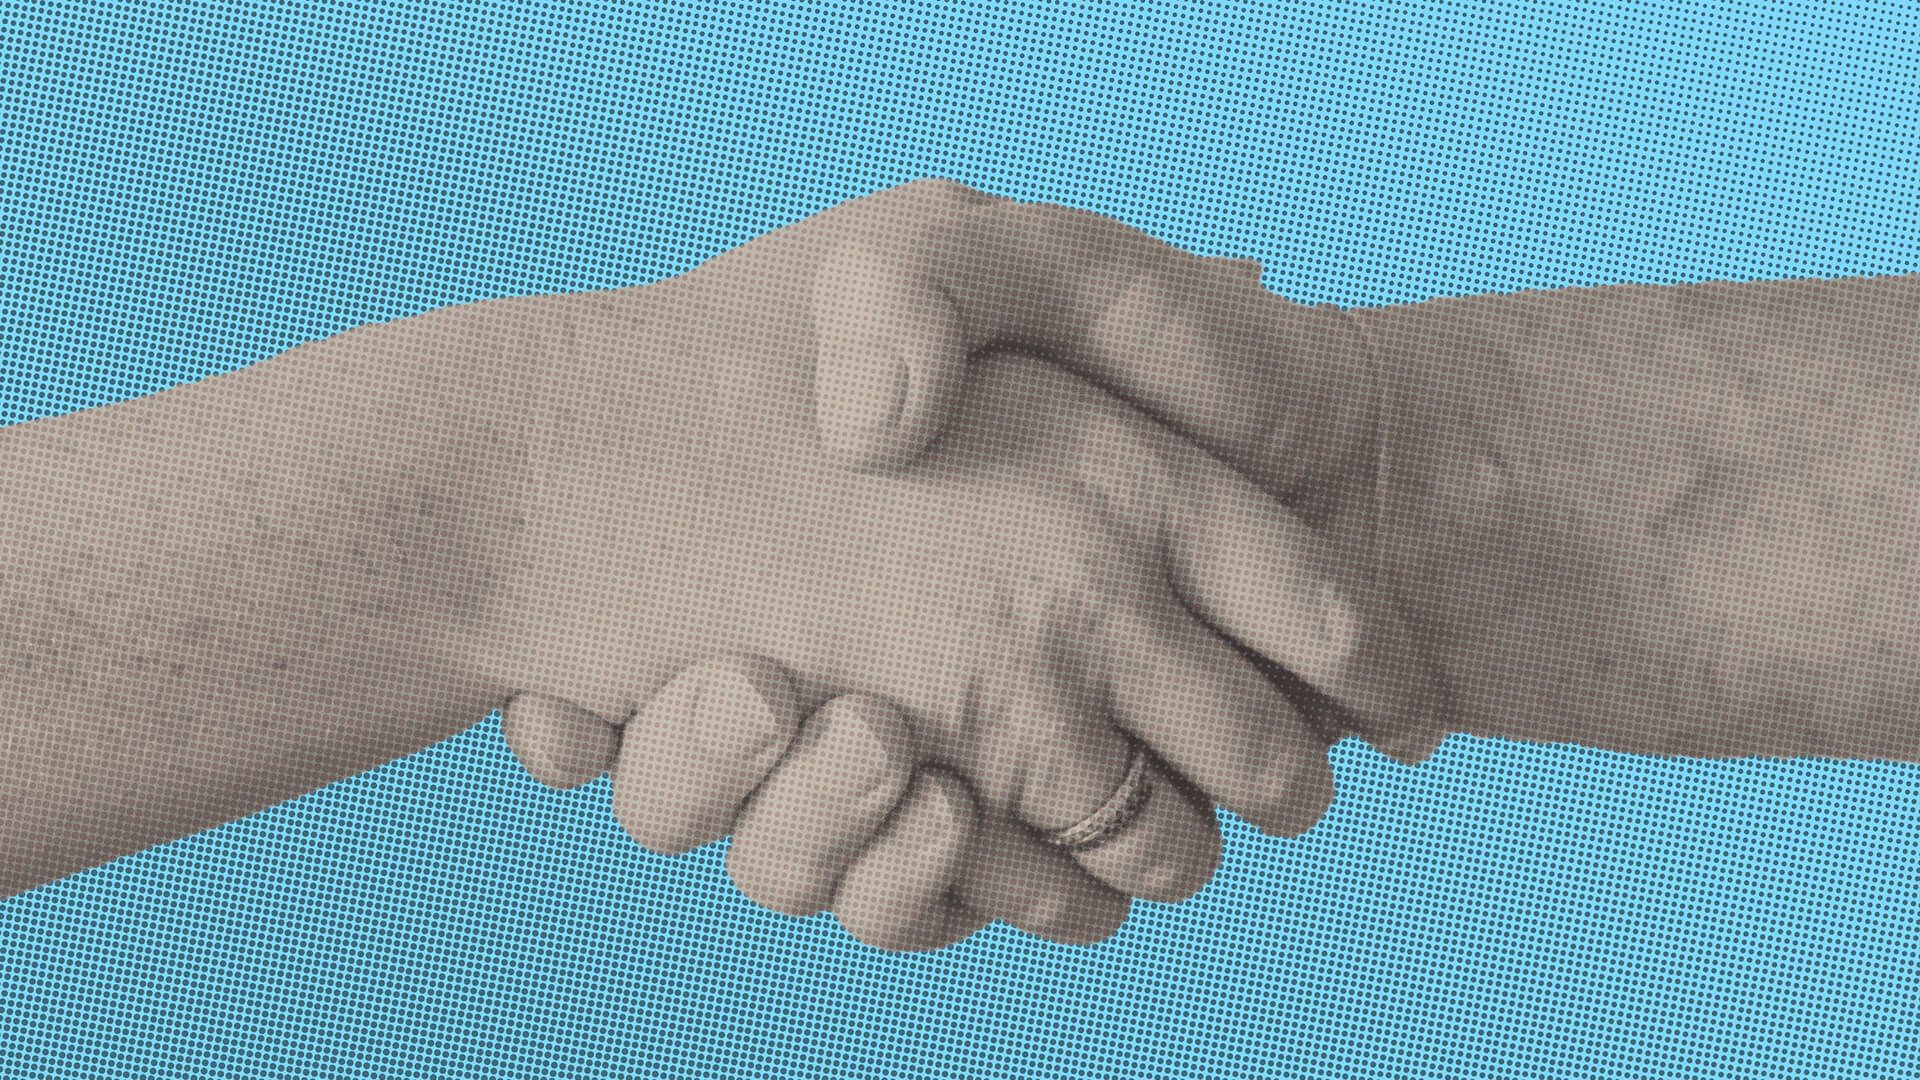 Content strategy for nonprofits title image: Two hands shaking before a blue background